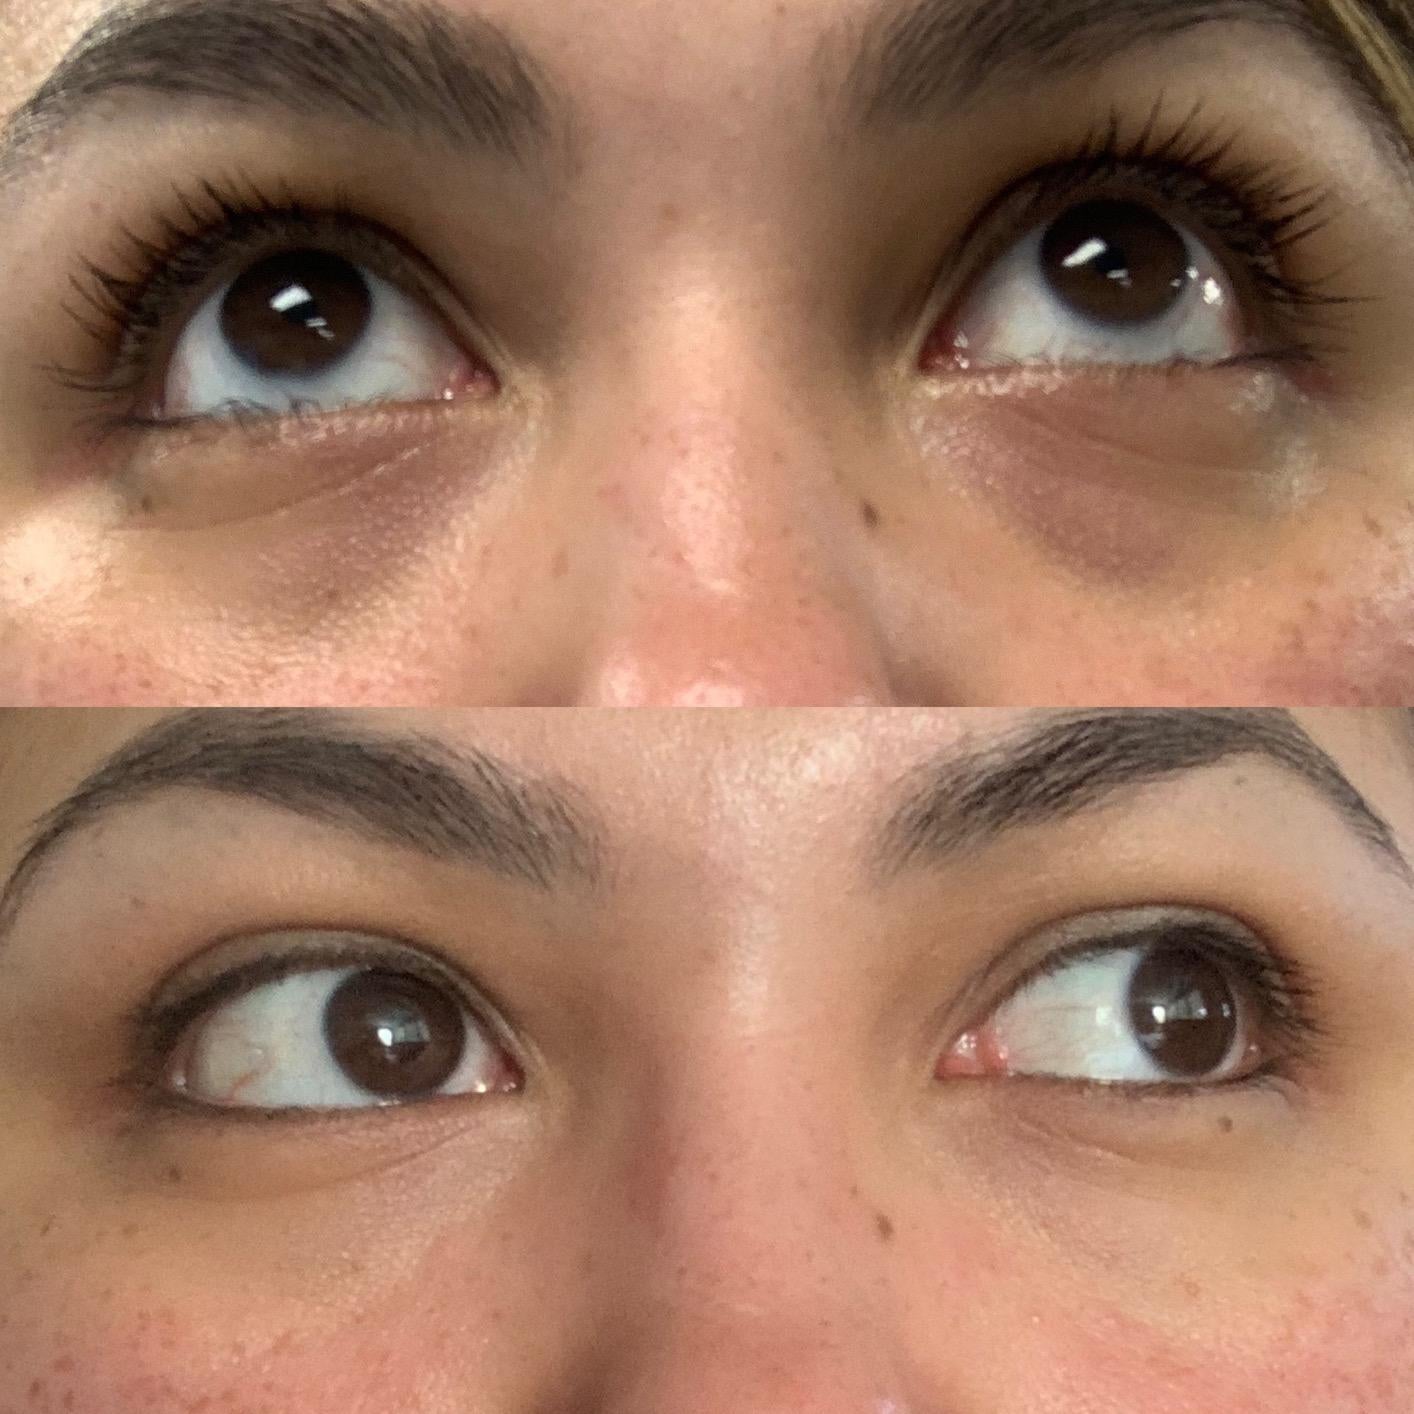 Reviewer before photo showing dark under-eye circles above an after photo showing brighter under-eye areas